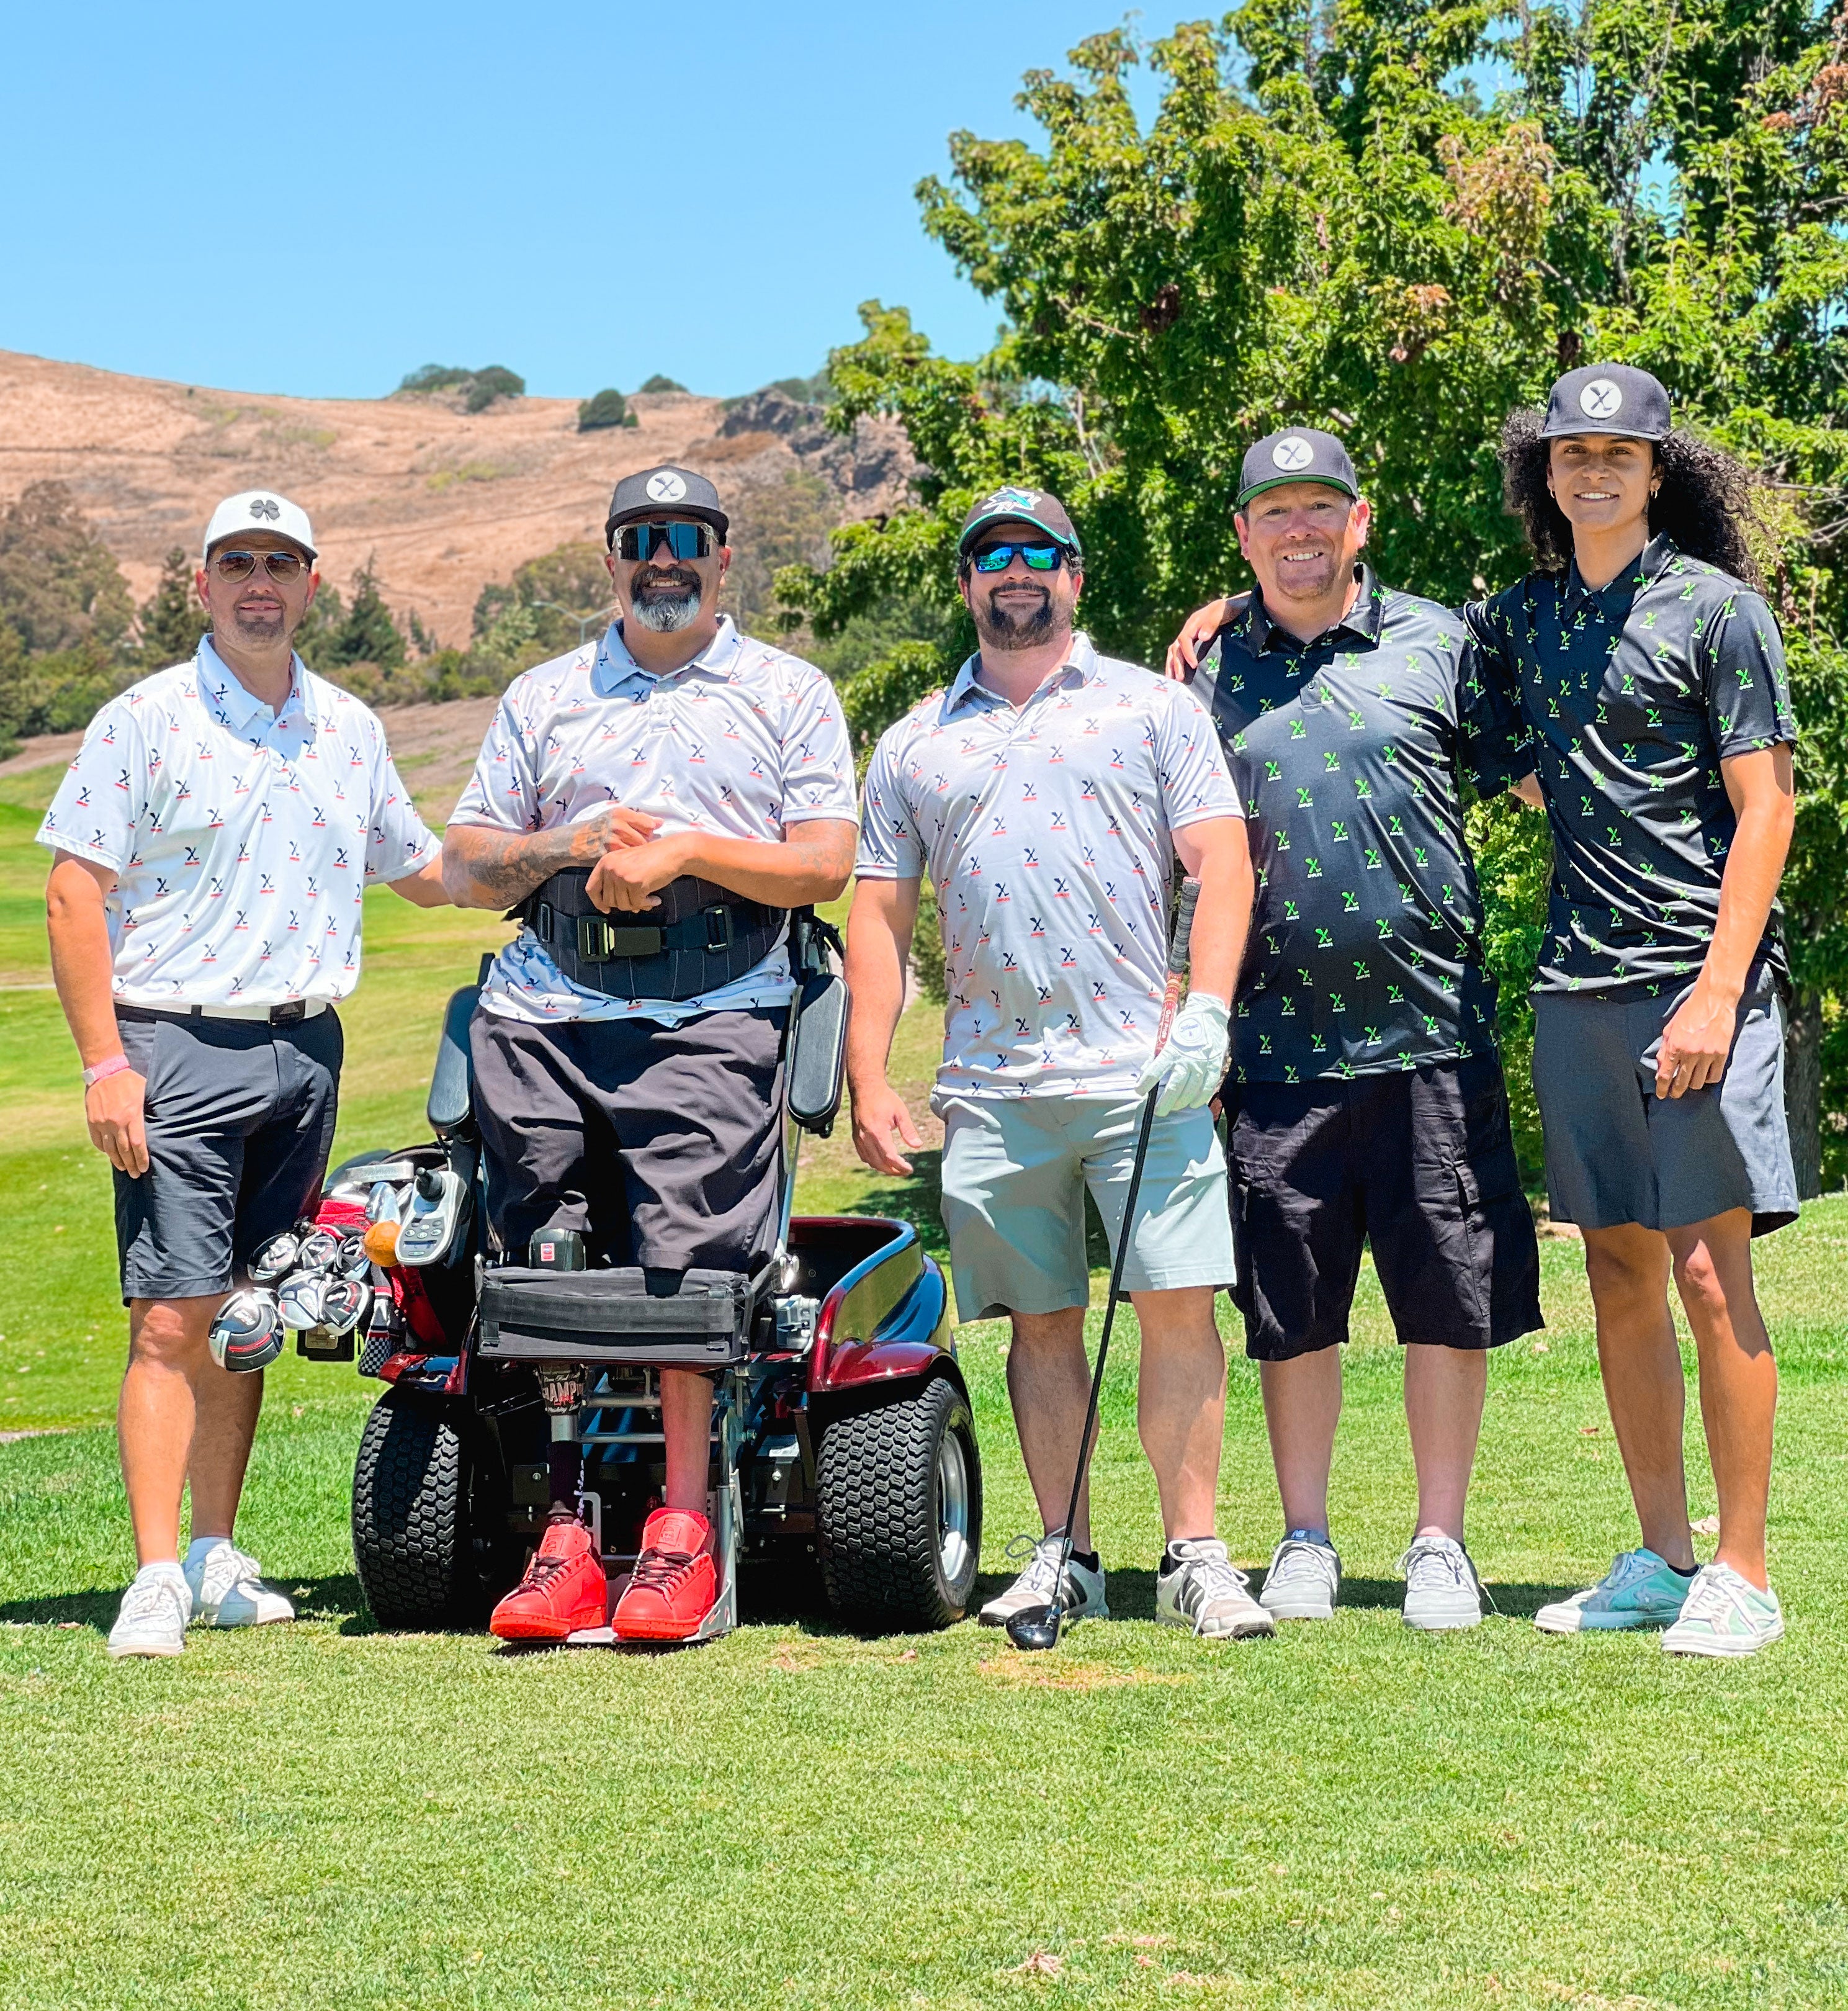 Amplife® Foundation & Amplife® Founder Abdul Nevarez with Amplife® Foundation Co-Founder Armando Nevarez and group of three other Amplife® Supporters on the golf course